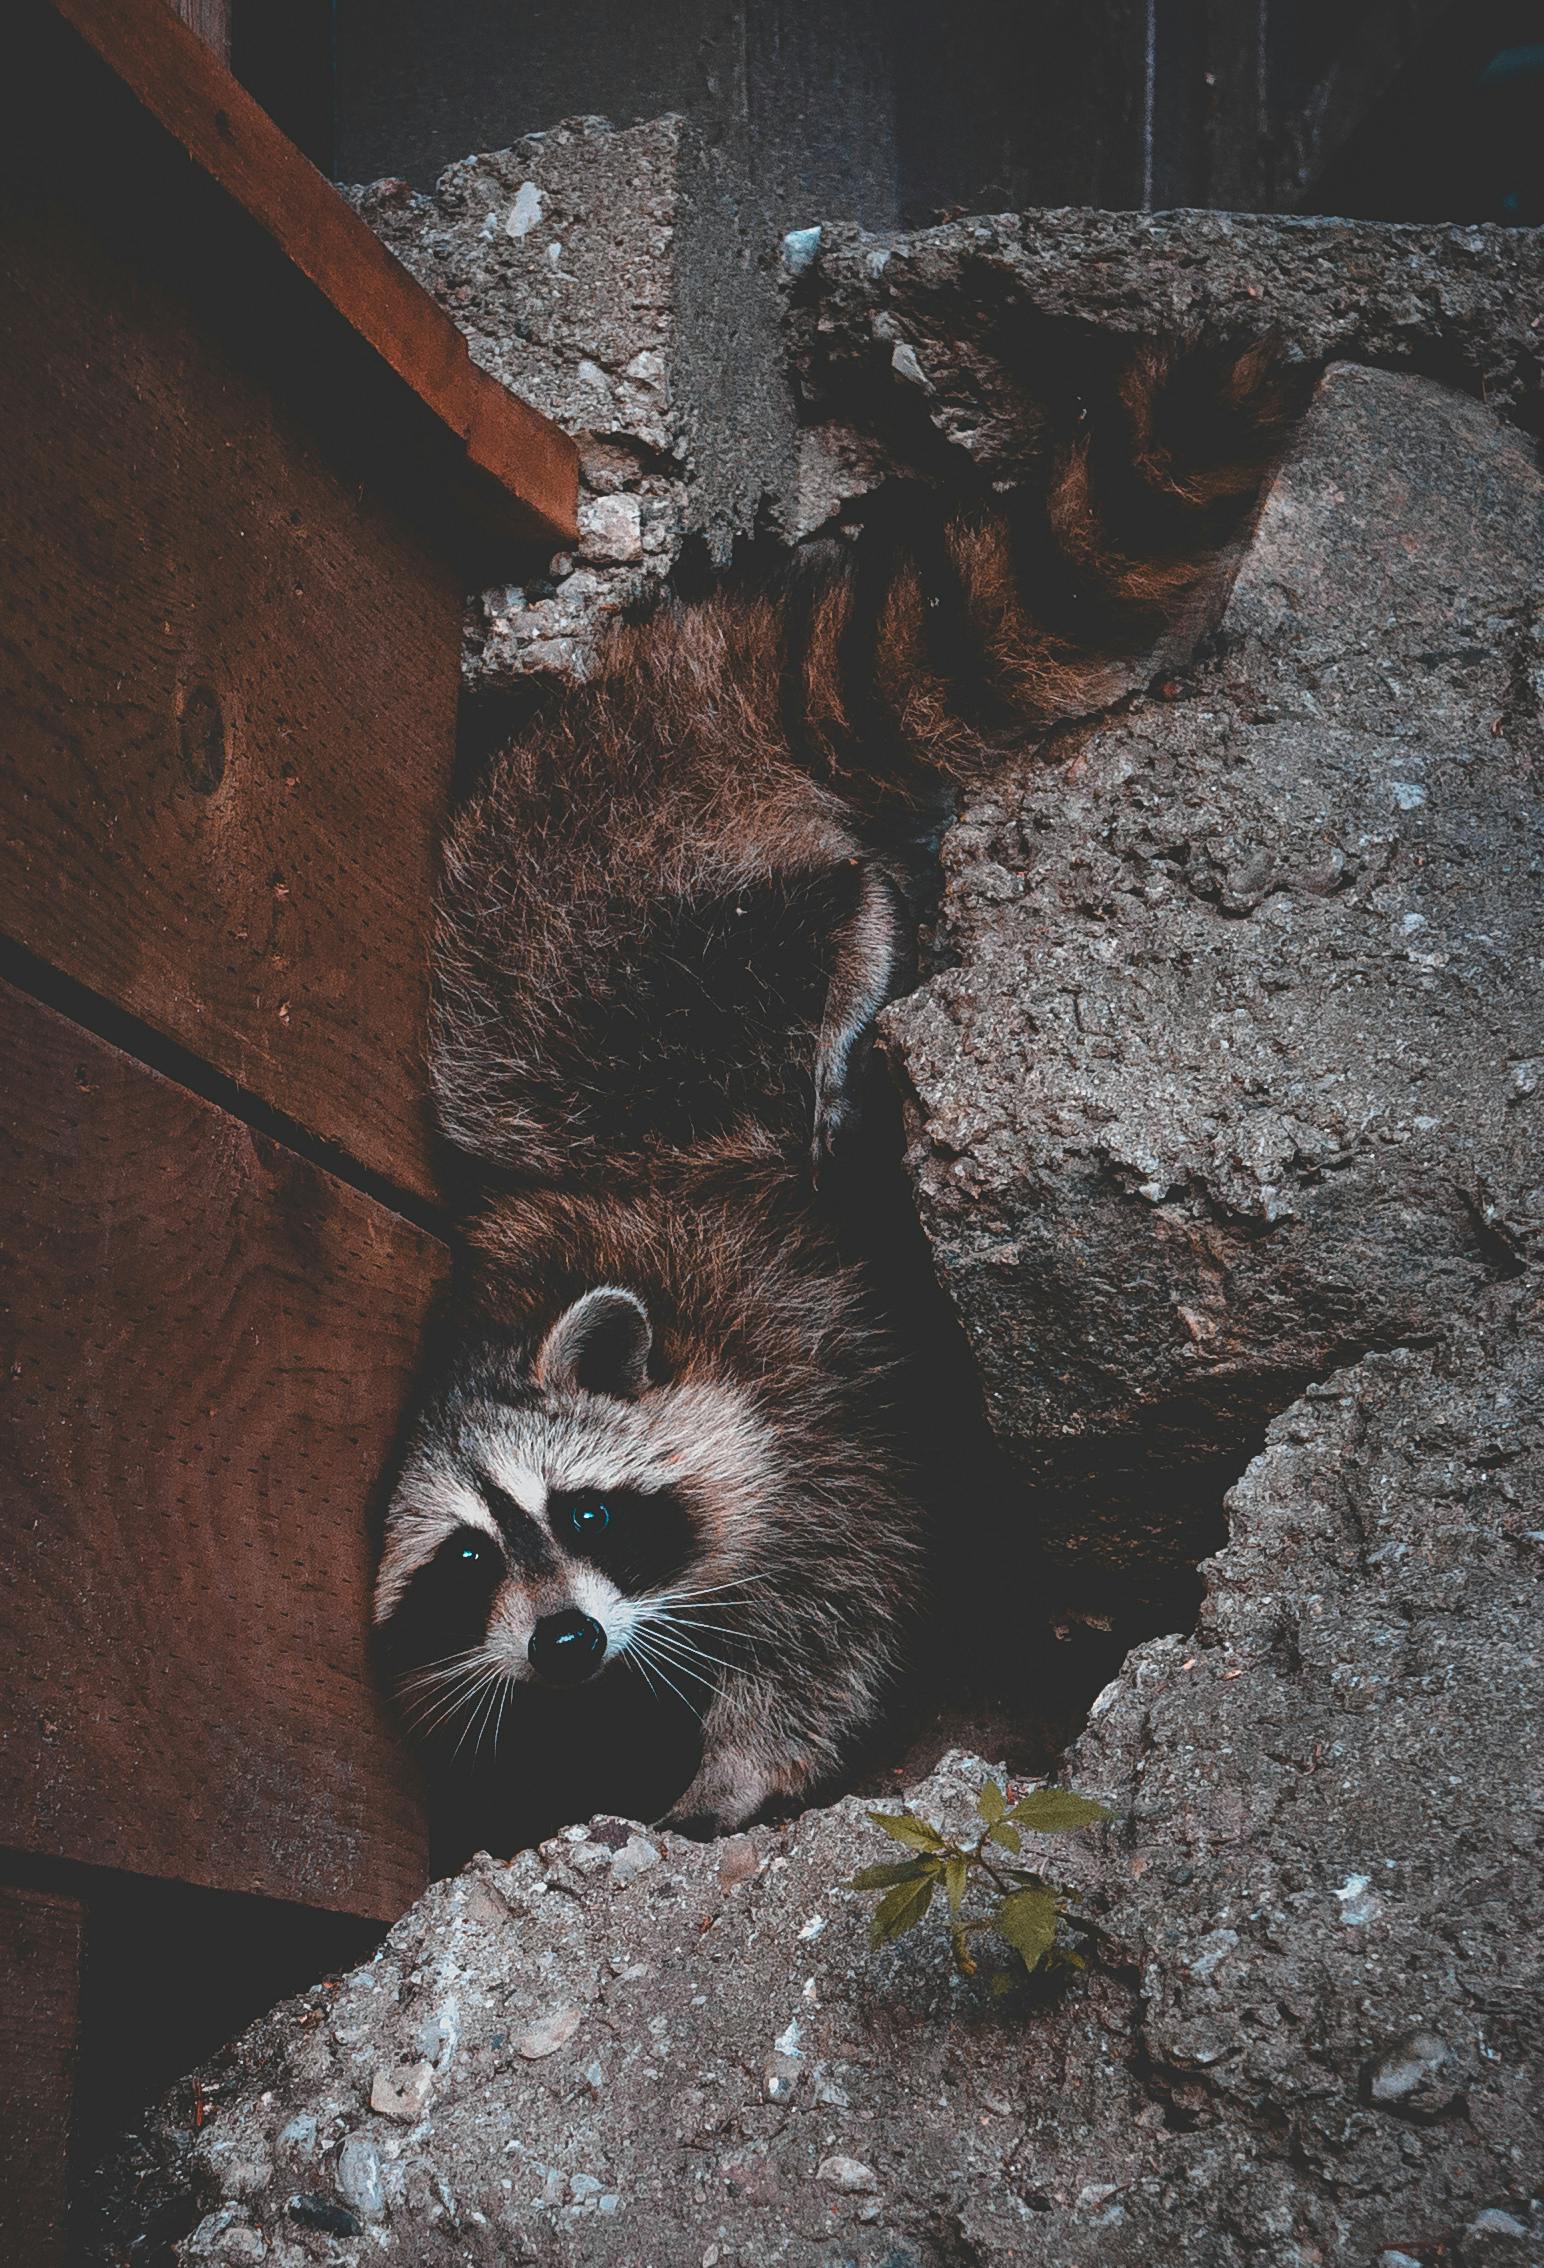 1+ Thousand Caged Raccoon Royalty-Free Images, Stock Photos